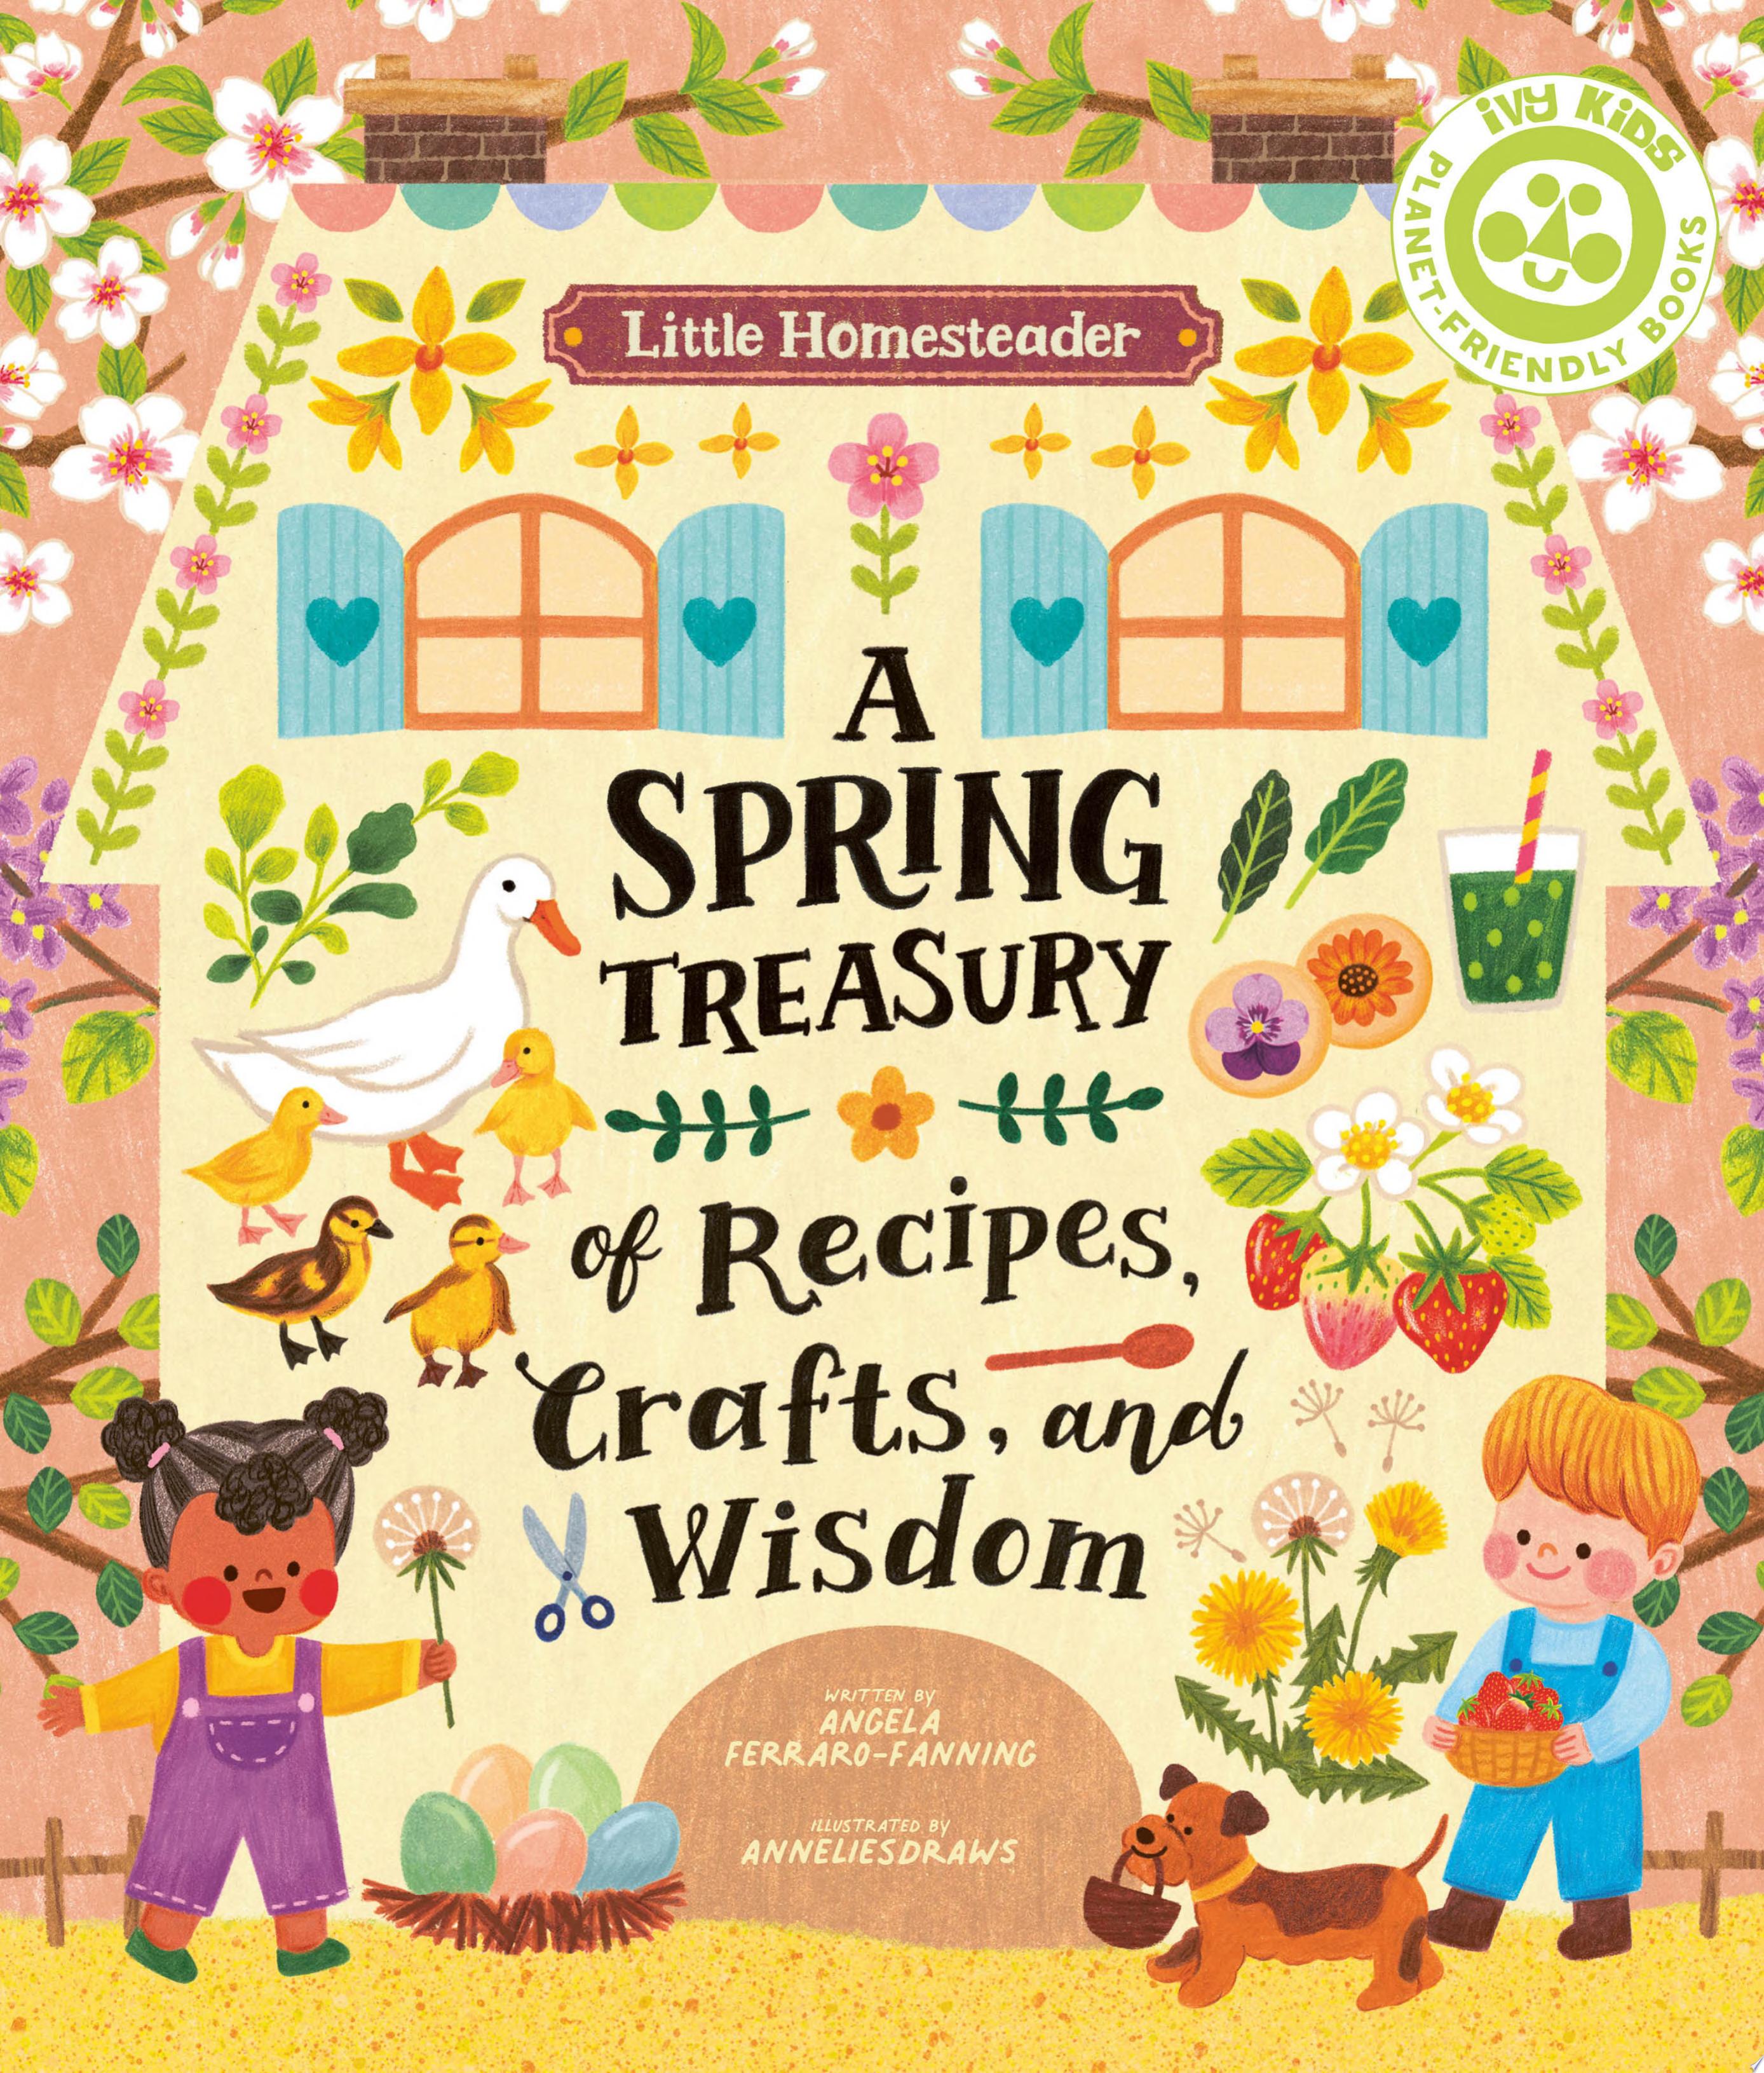 Image for "Little Homesteader: A Spring Treasury of Recipes, Crafts and Wisdom"